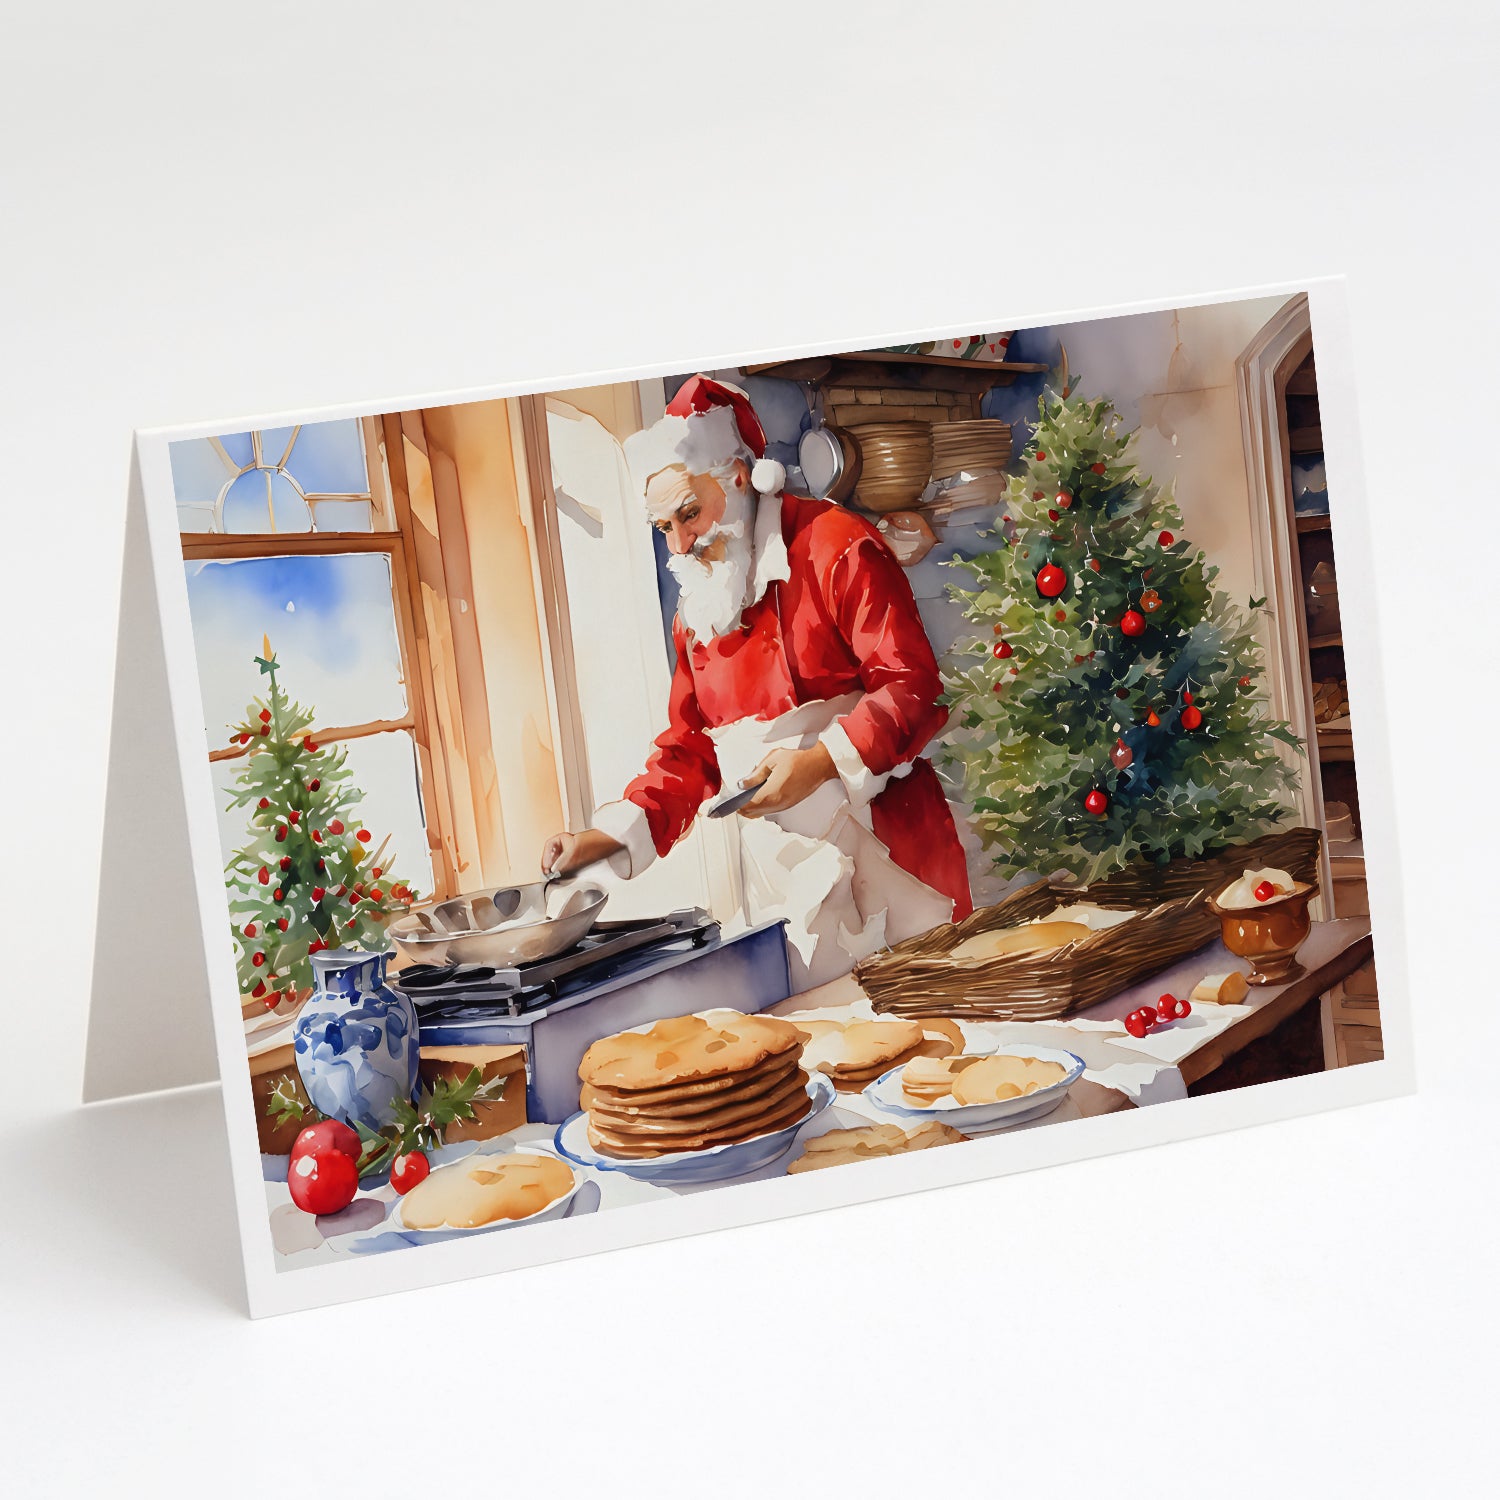 Buy this Cookies with Santa Claus Babbo Natale Greeting Cards Pack of 8